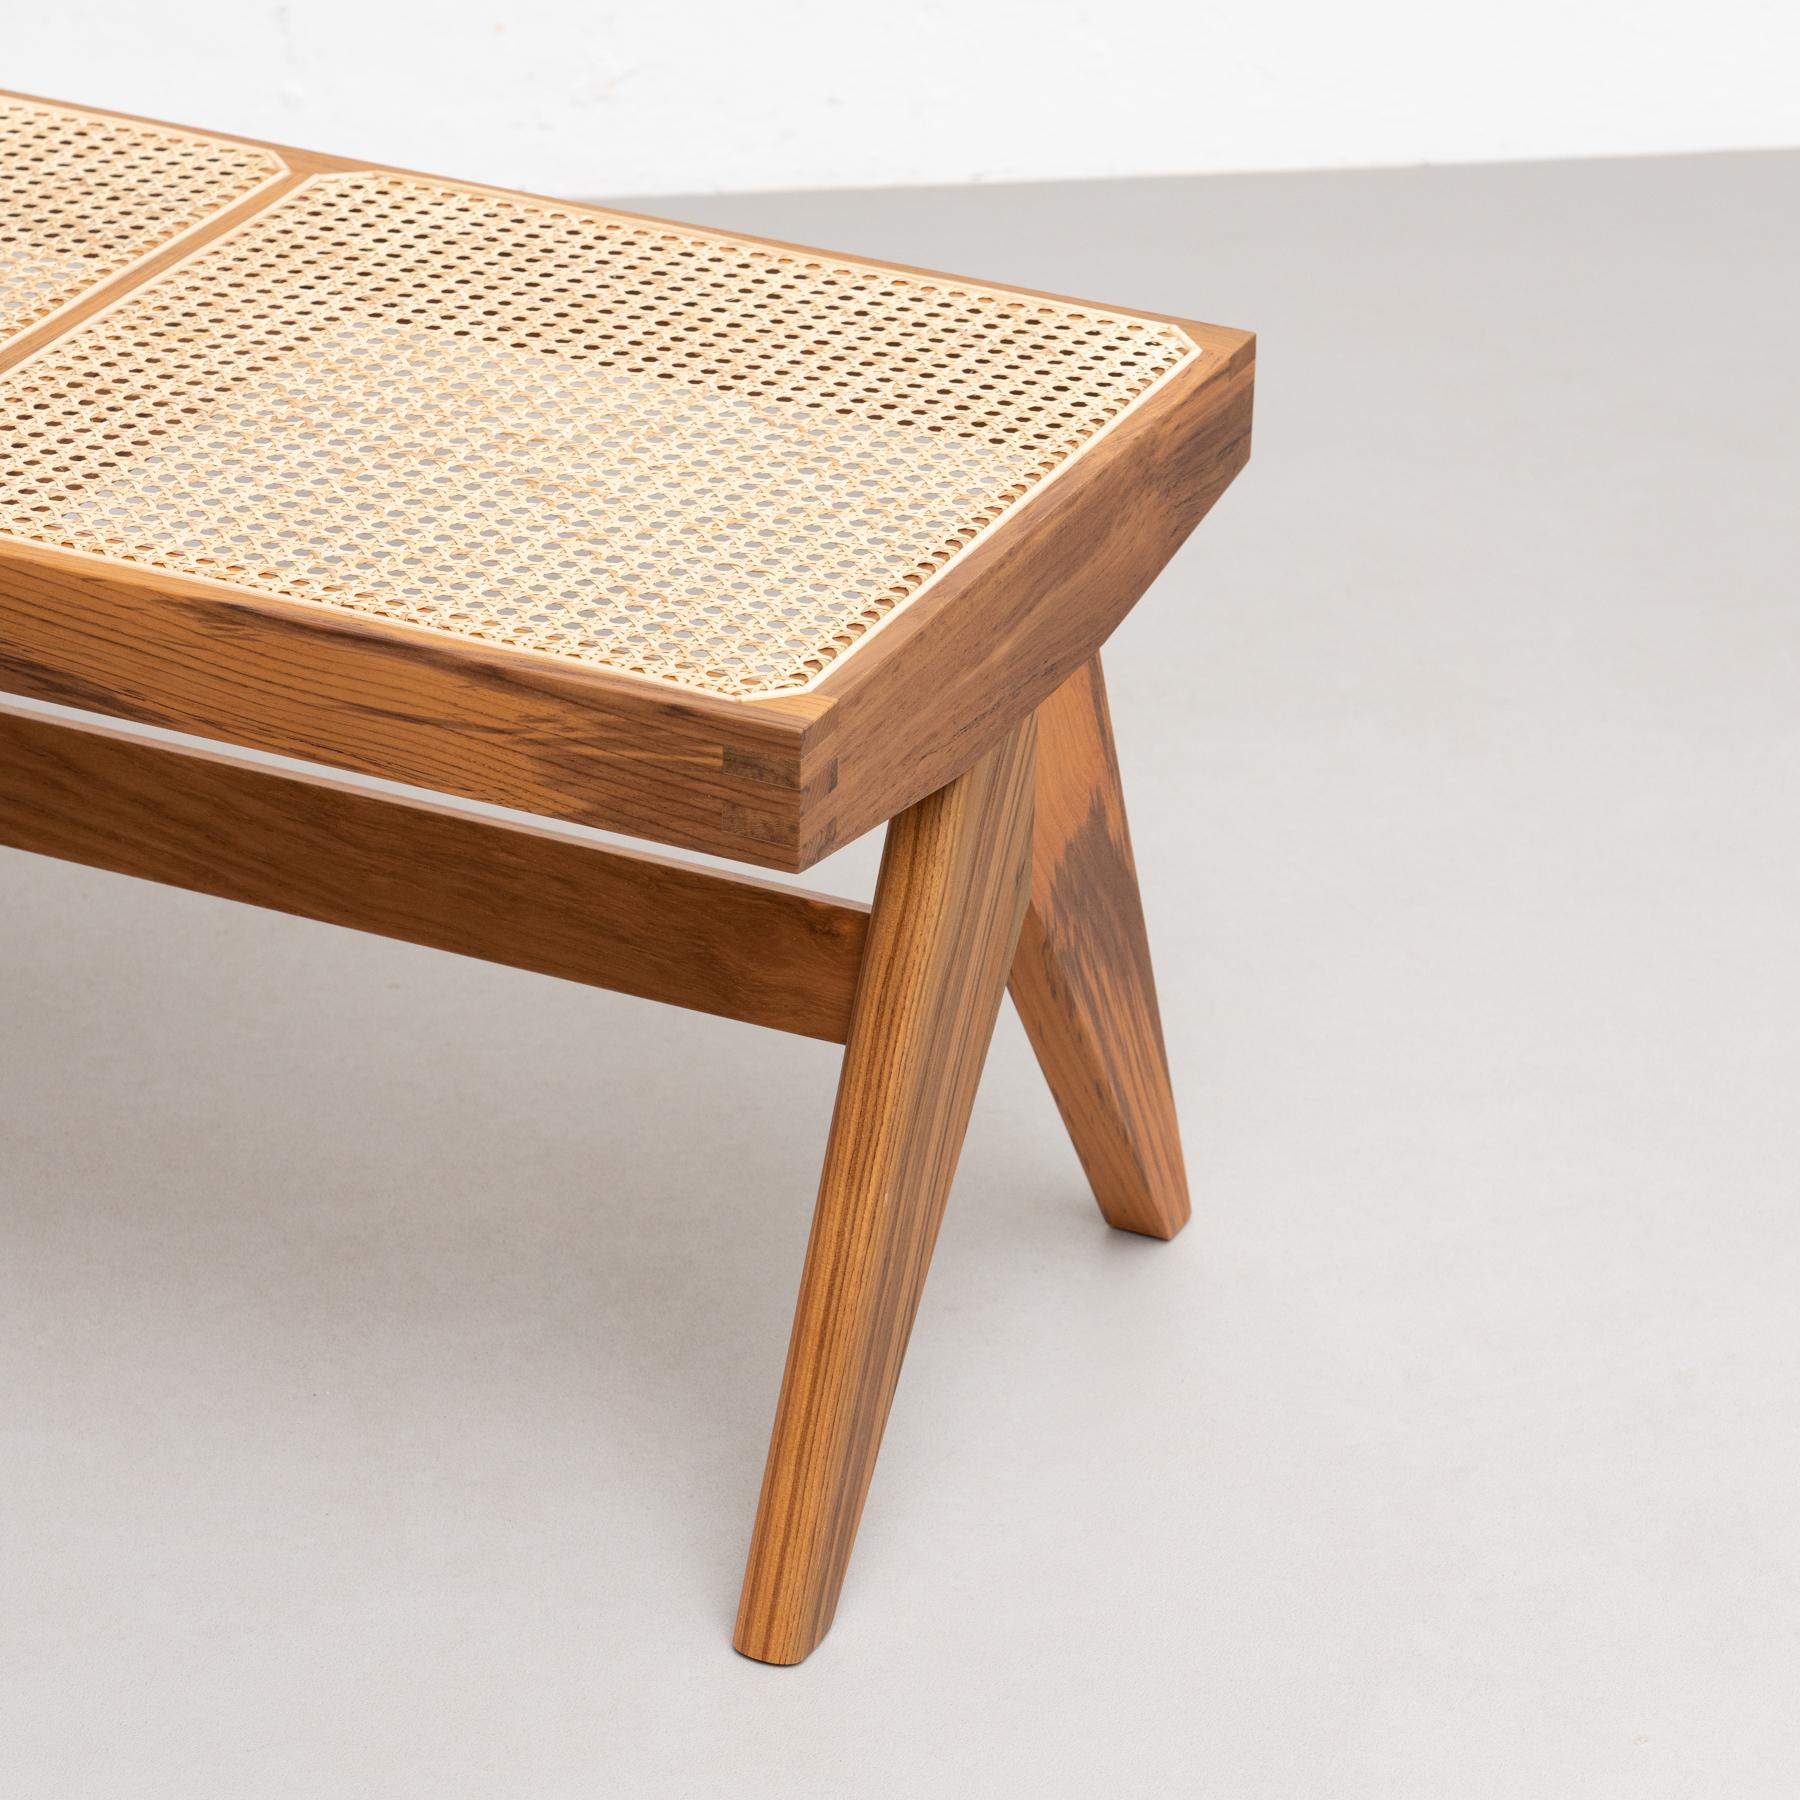 Pierre Jeanneret 057 Civil Bench, Wood and Woven Viennese Cane For Sale 11